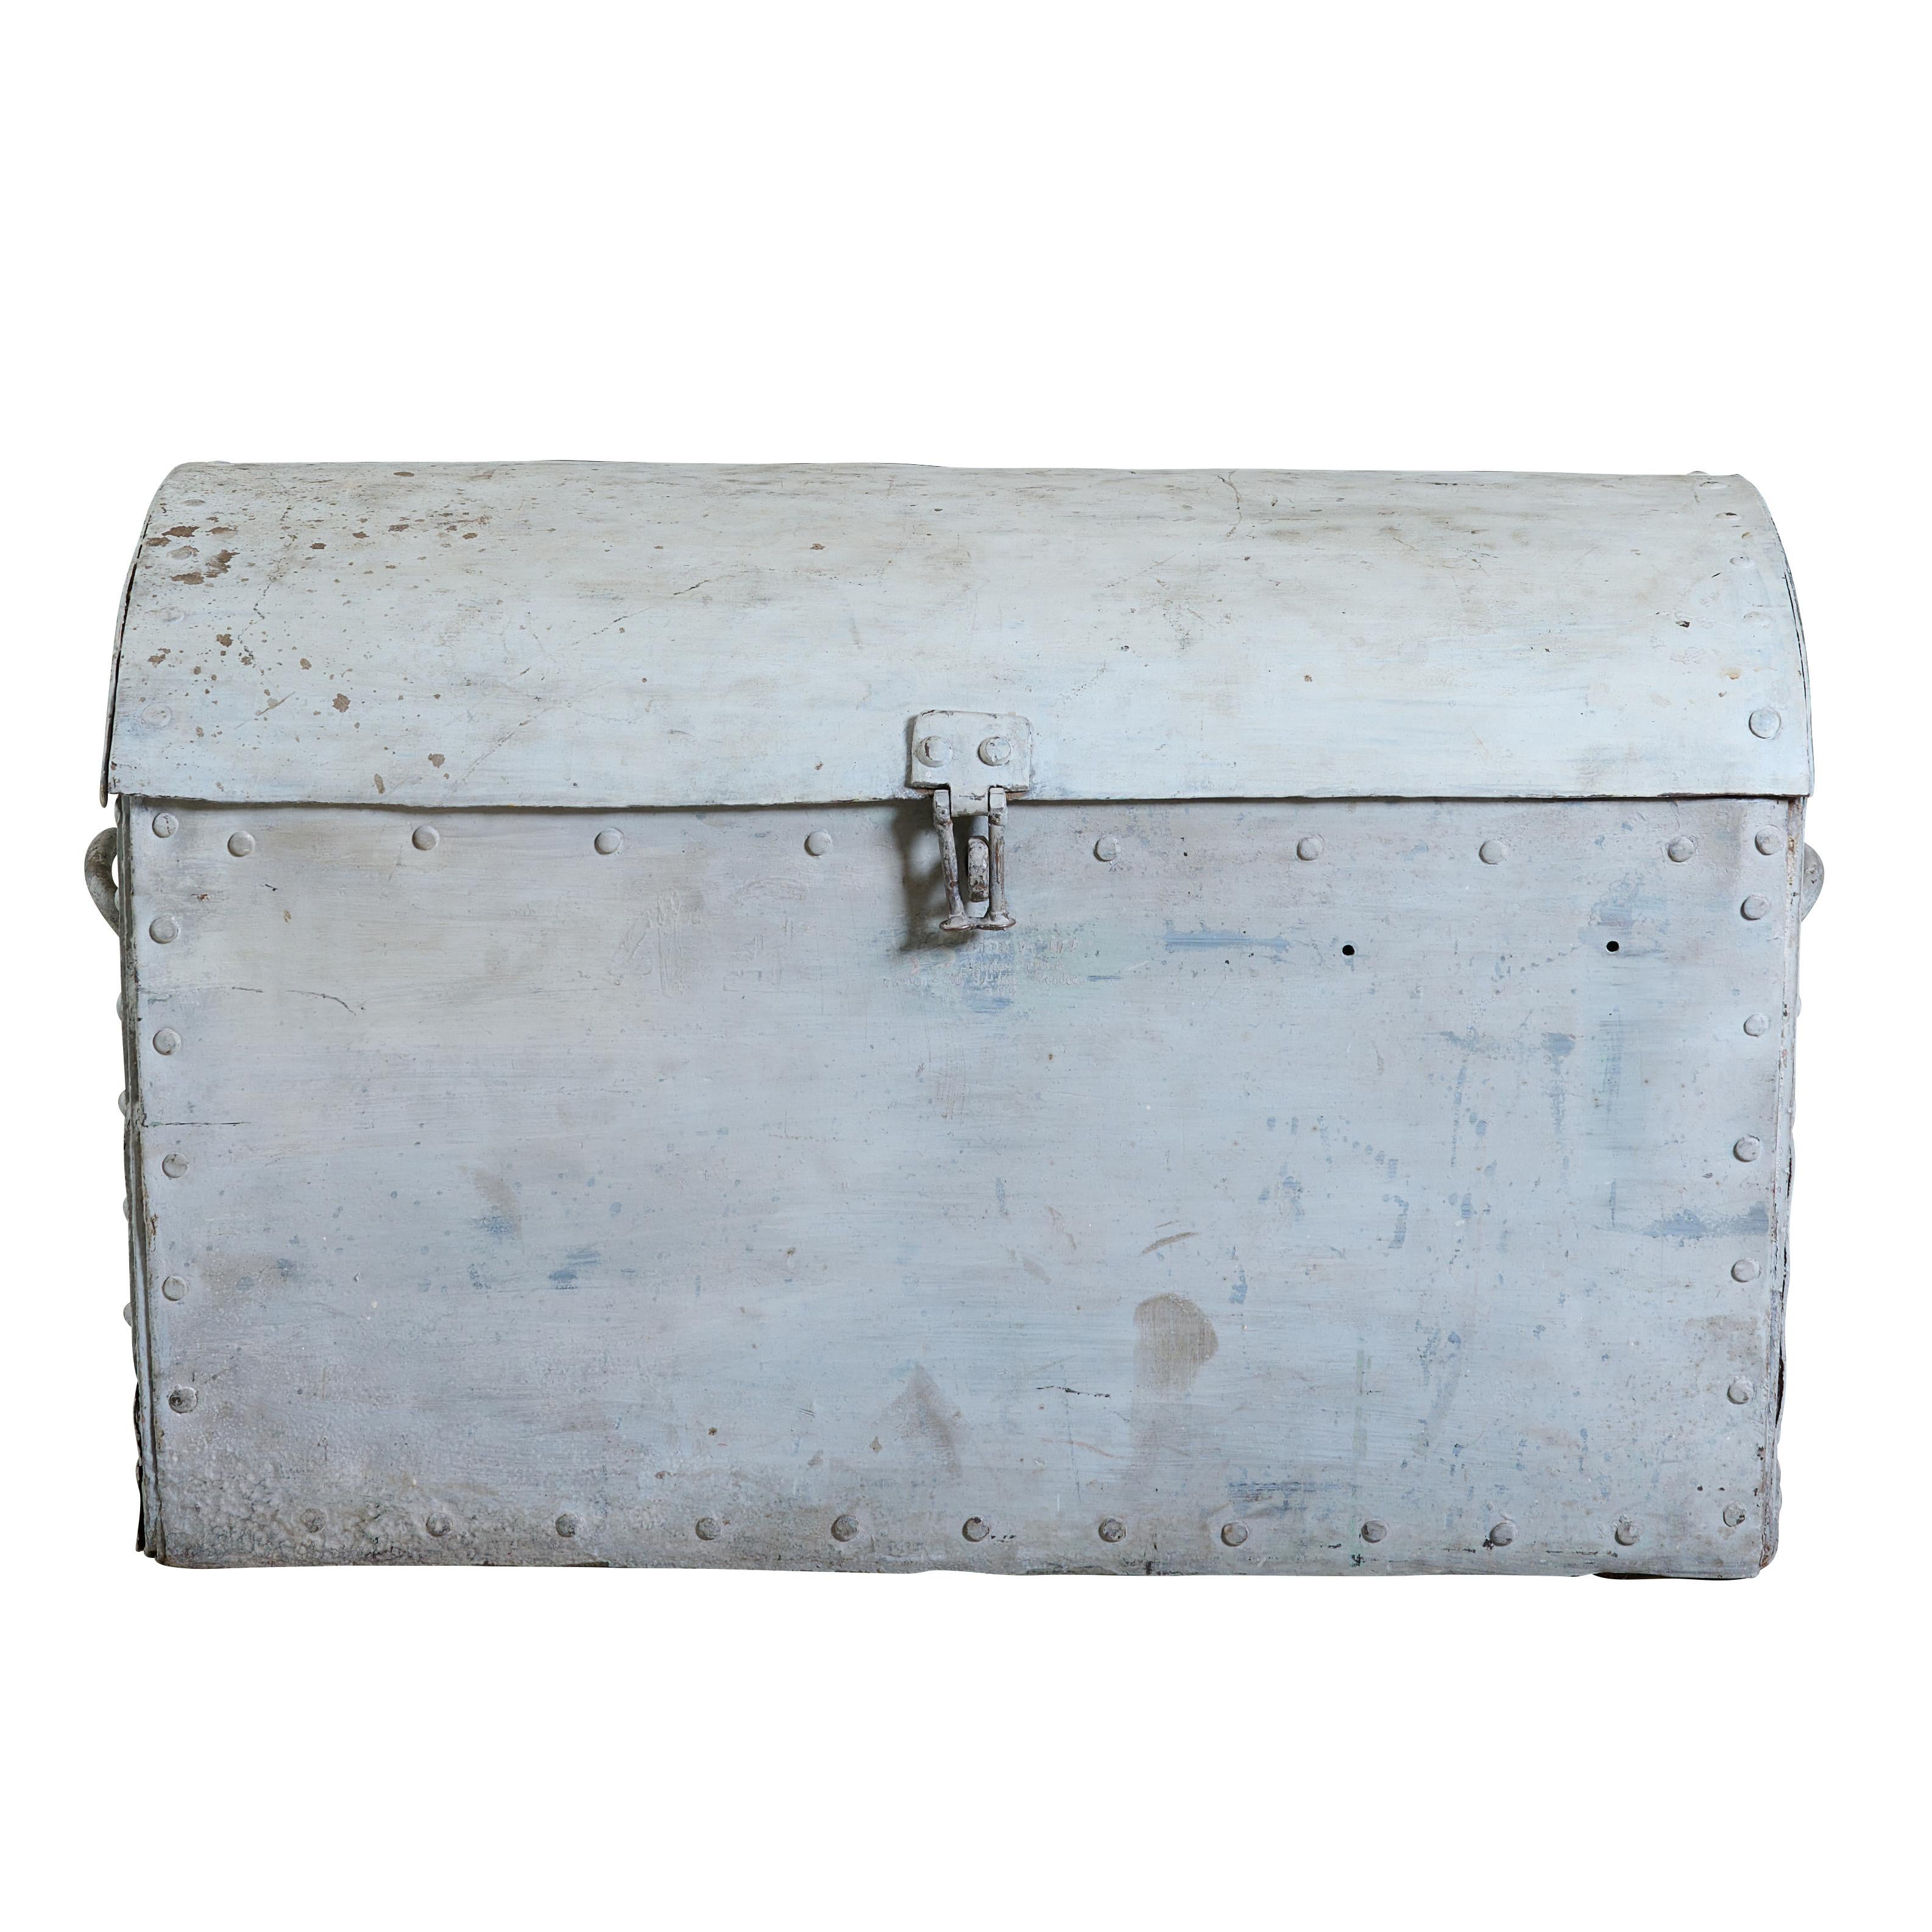 Wrought iron trunk with great paint. Cool hardware and handles.

